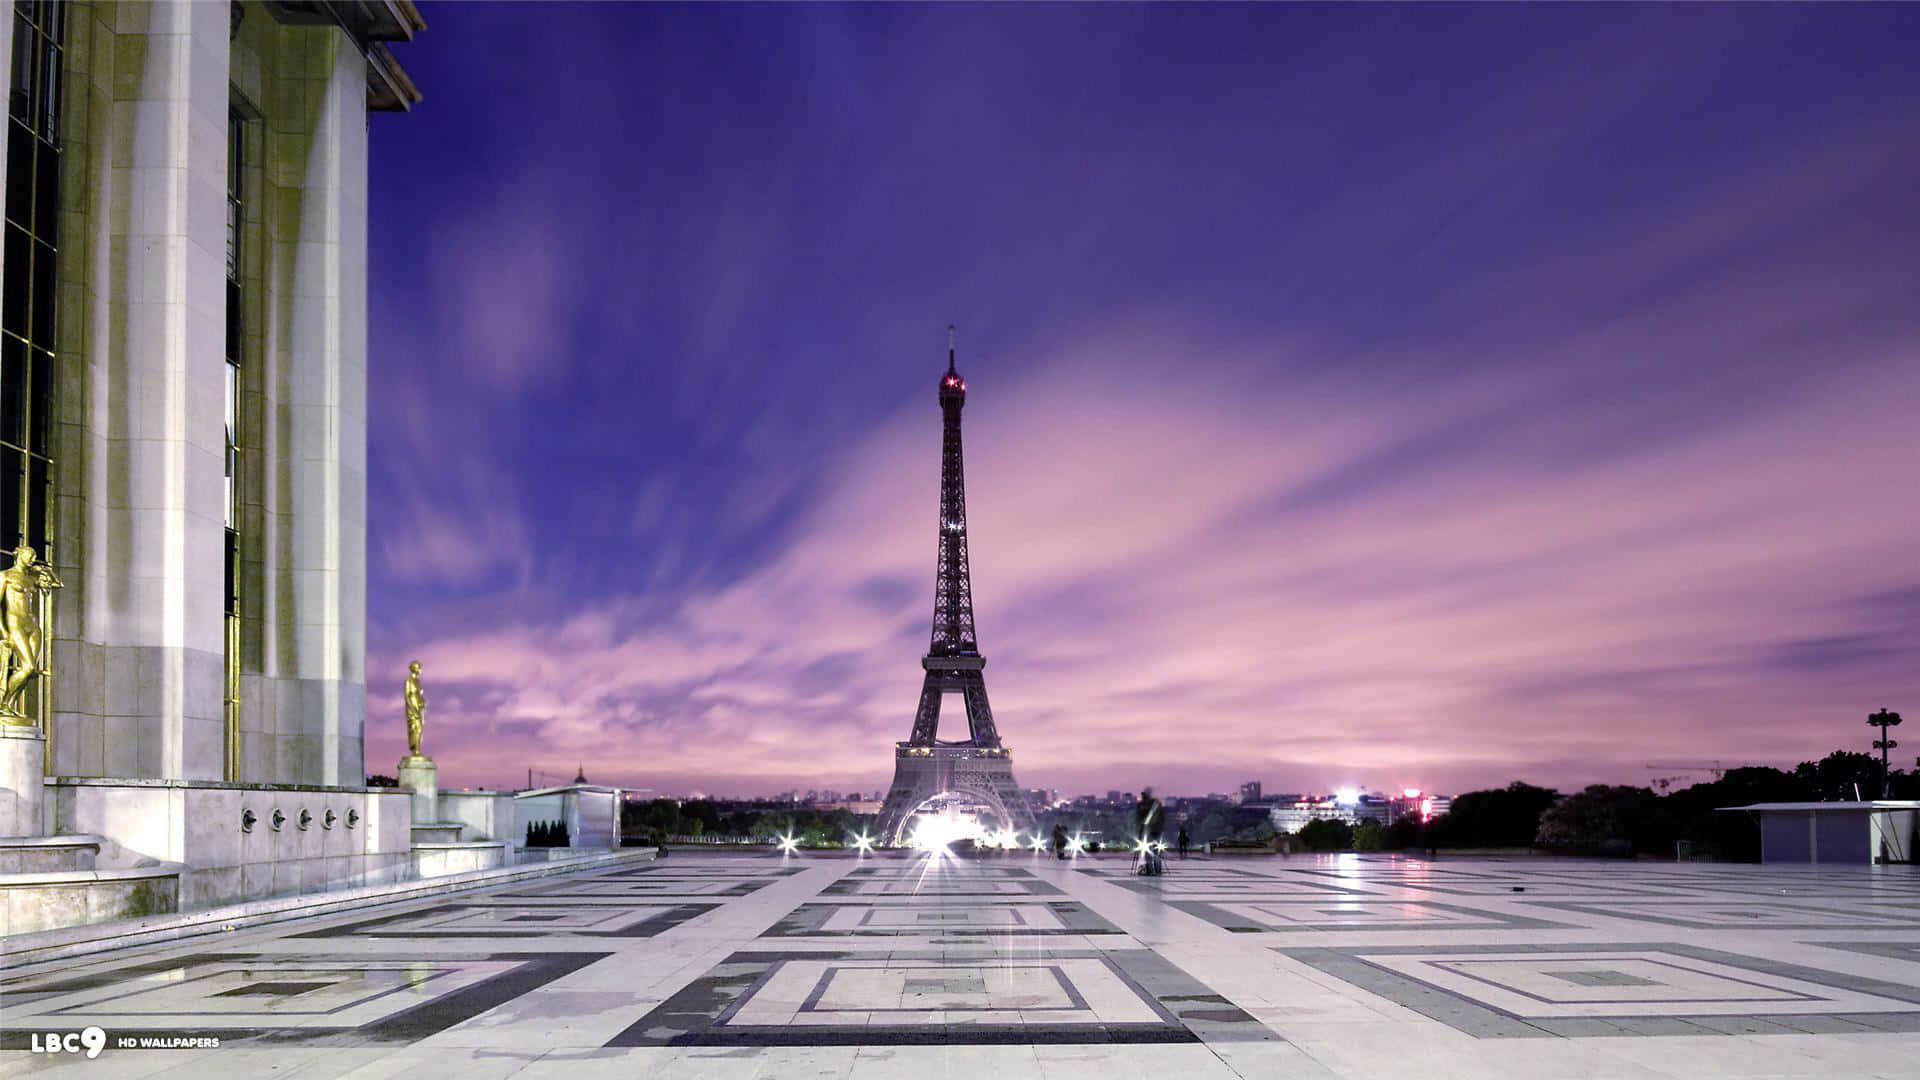 The Magnificence of the Eiffel Tower